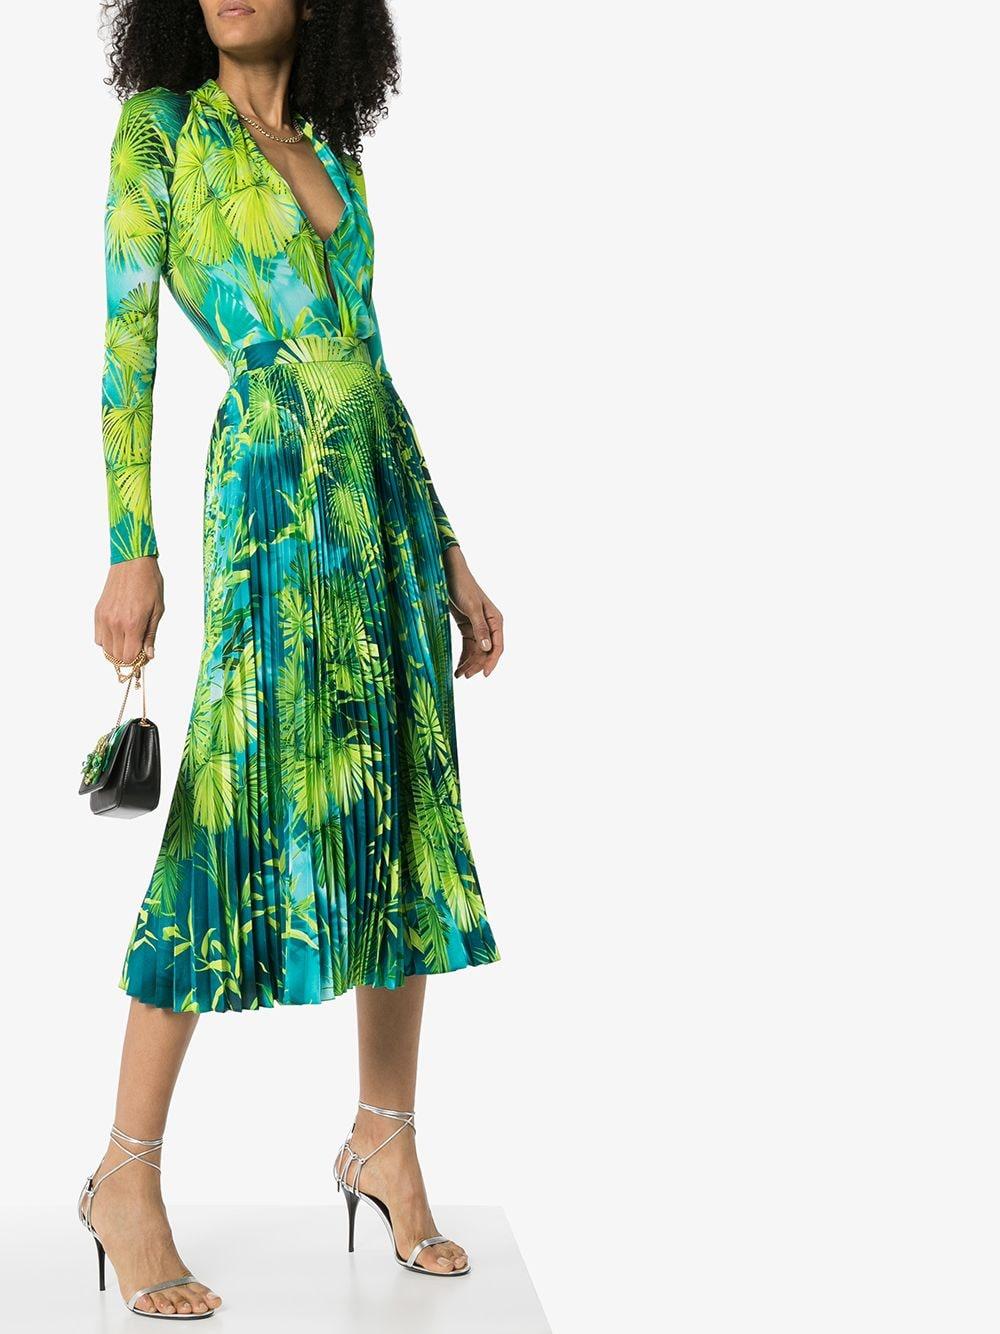 Versace Spring 2020 Verde Jungle Print Pleated High Rise Midi Skirt

Plant this green Jungle print pleated midi skirt from Versace into your wardrobe and button up into the beauty when you're in the mood to make your coworkers green with envy. You'd